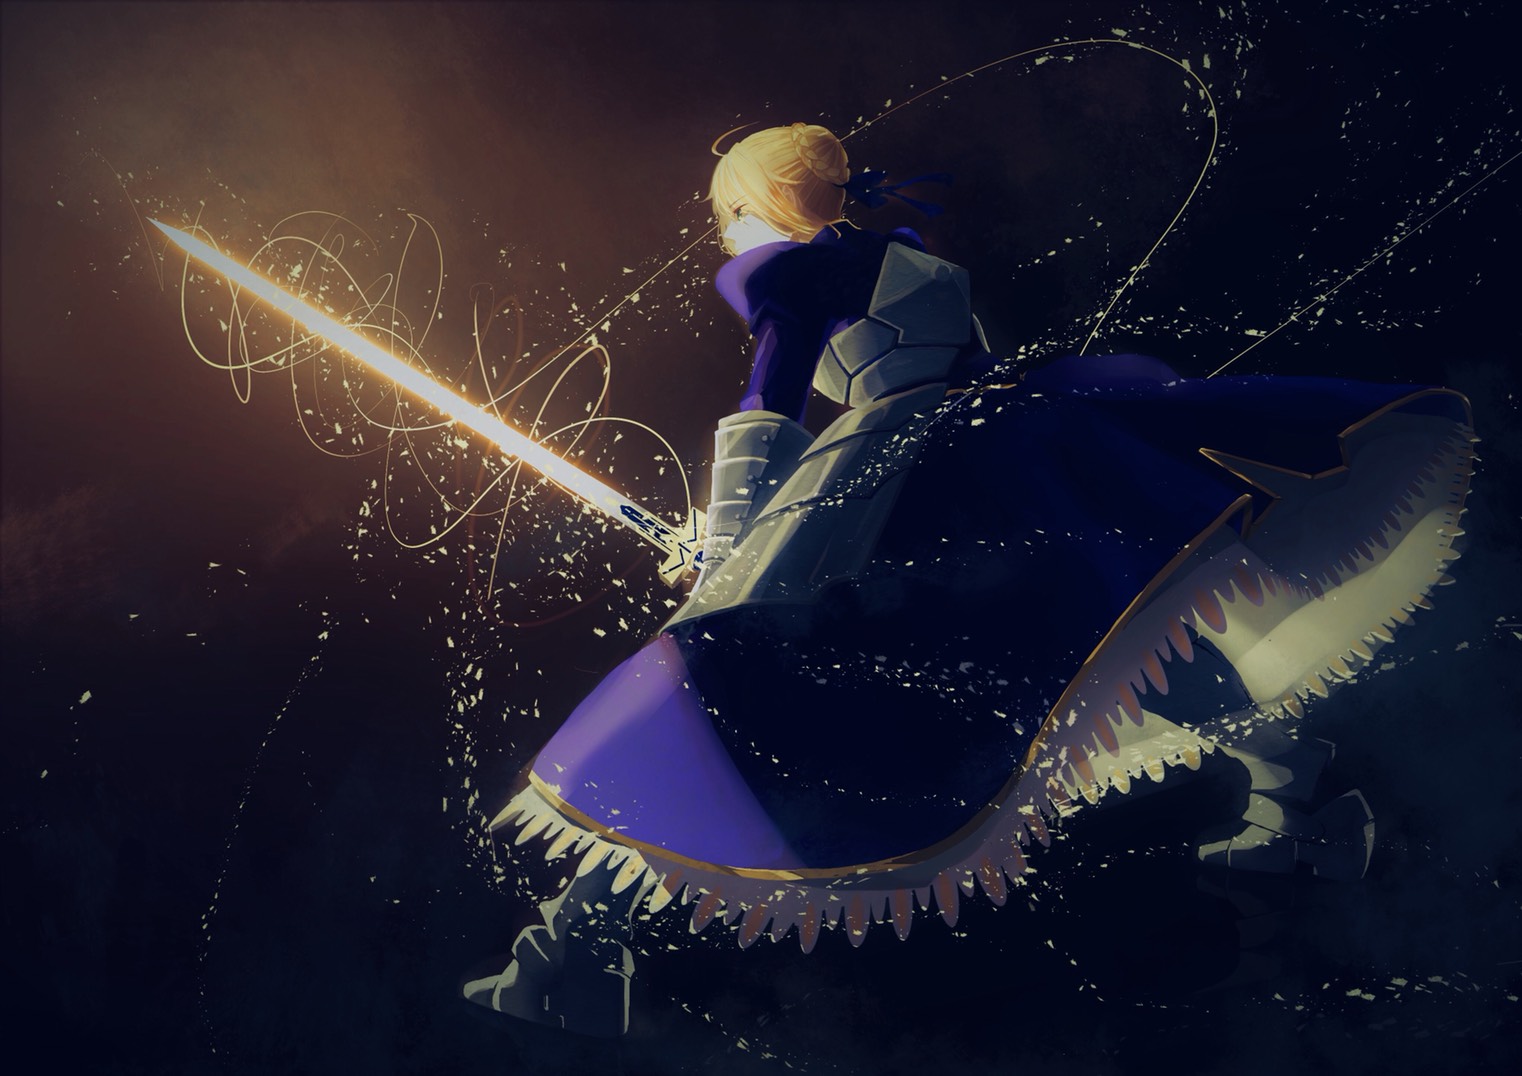 Fate Series FGO Fate Stay Night Fate Zero Anime Girls 2D Female Warrior Long Hair Women With Swords  1522x1076